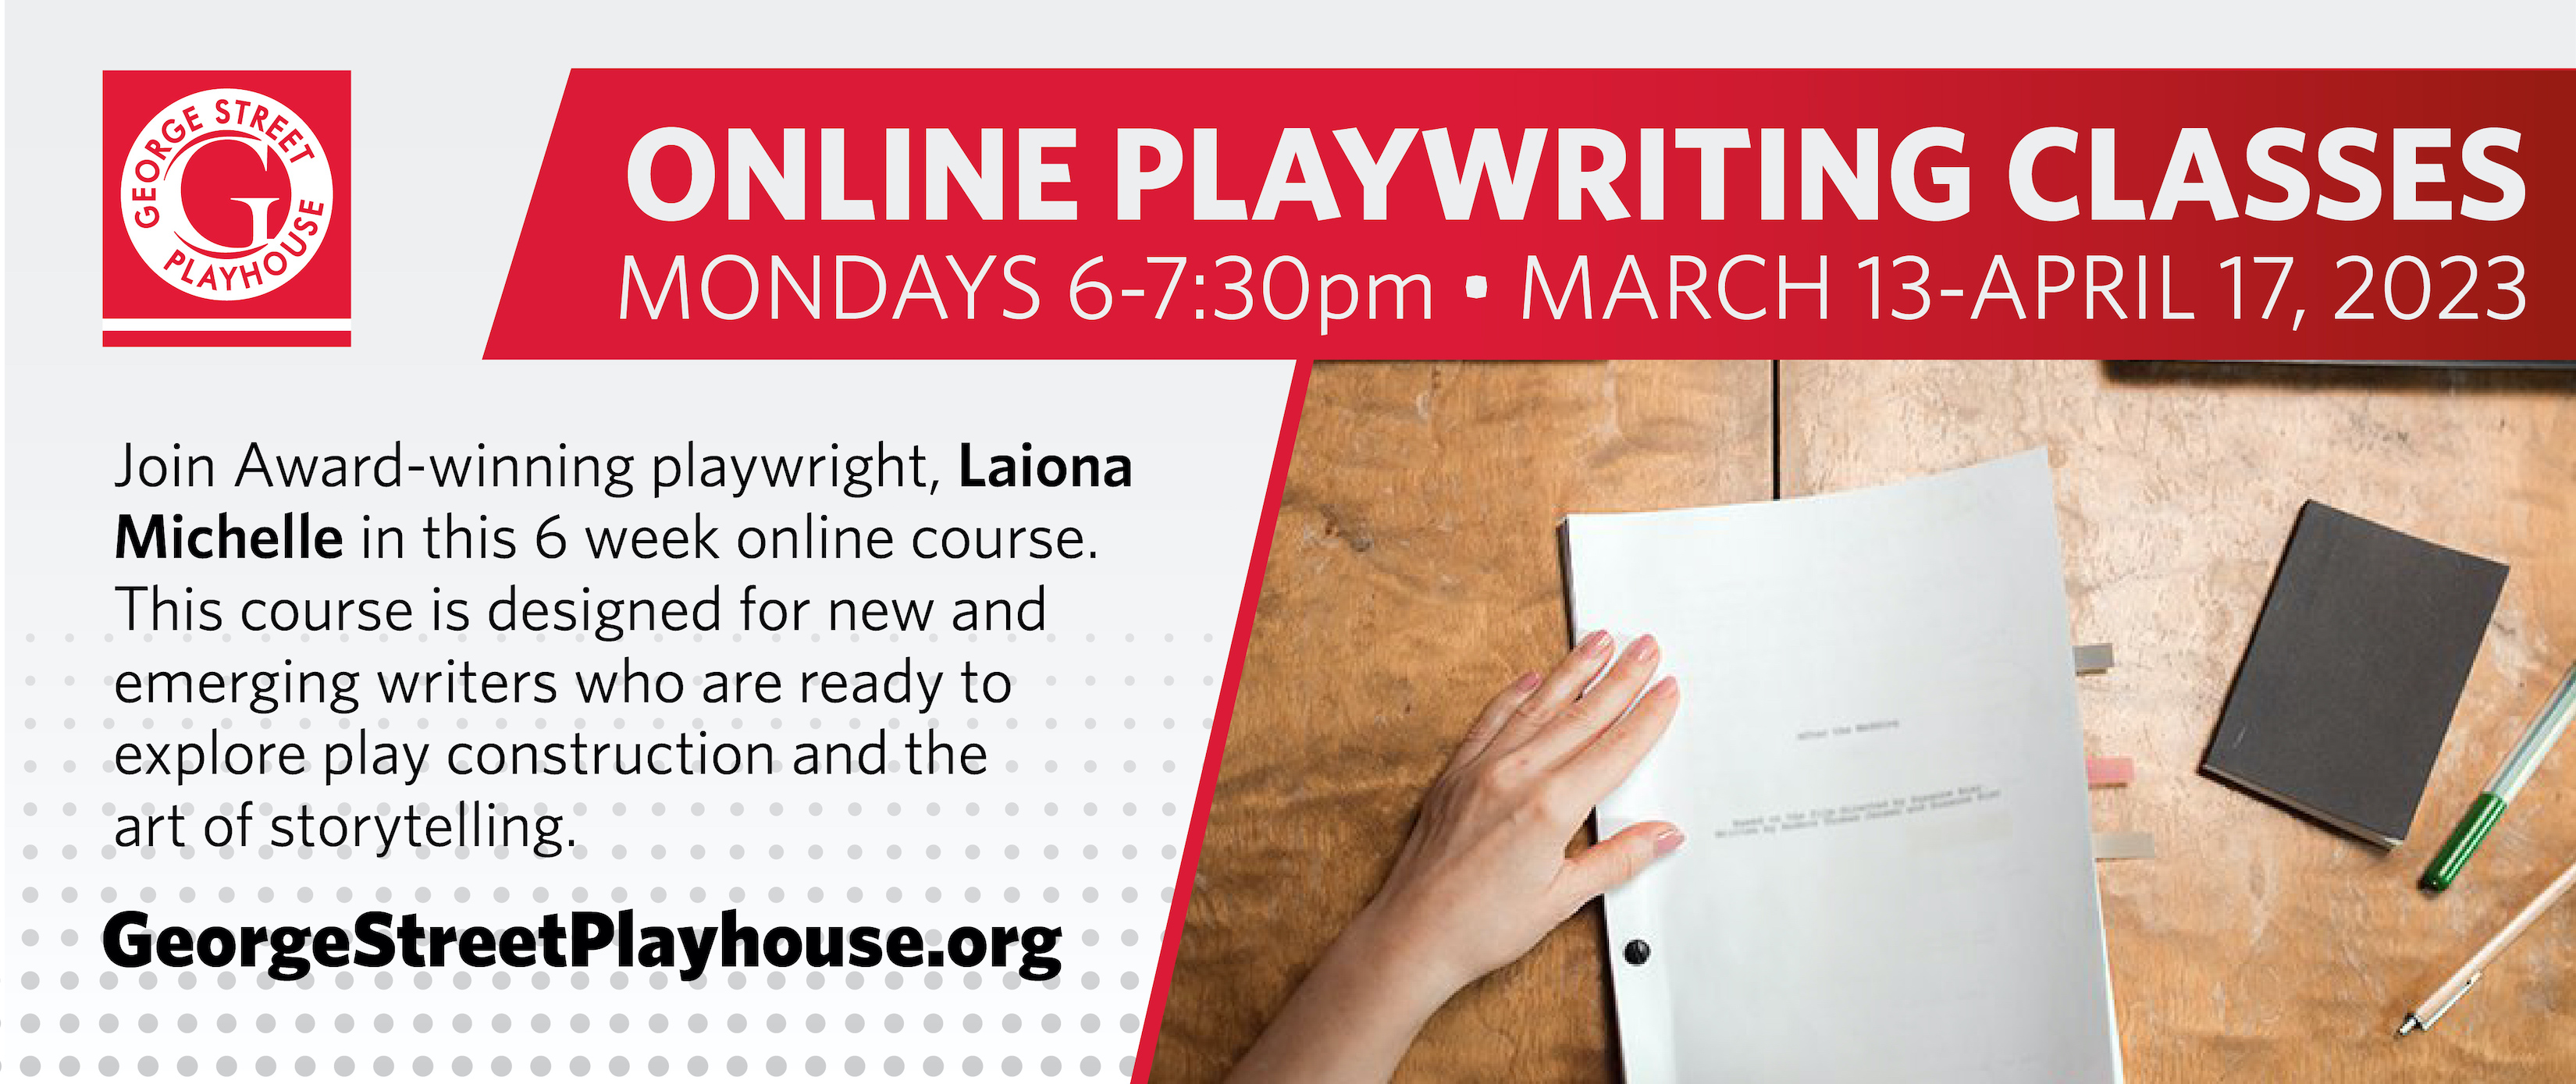 Online Playwriting Classes